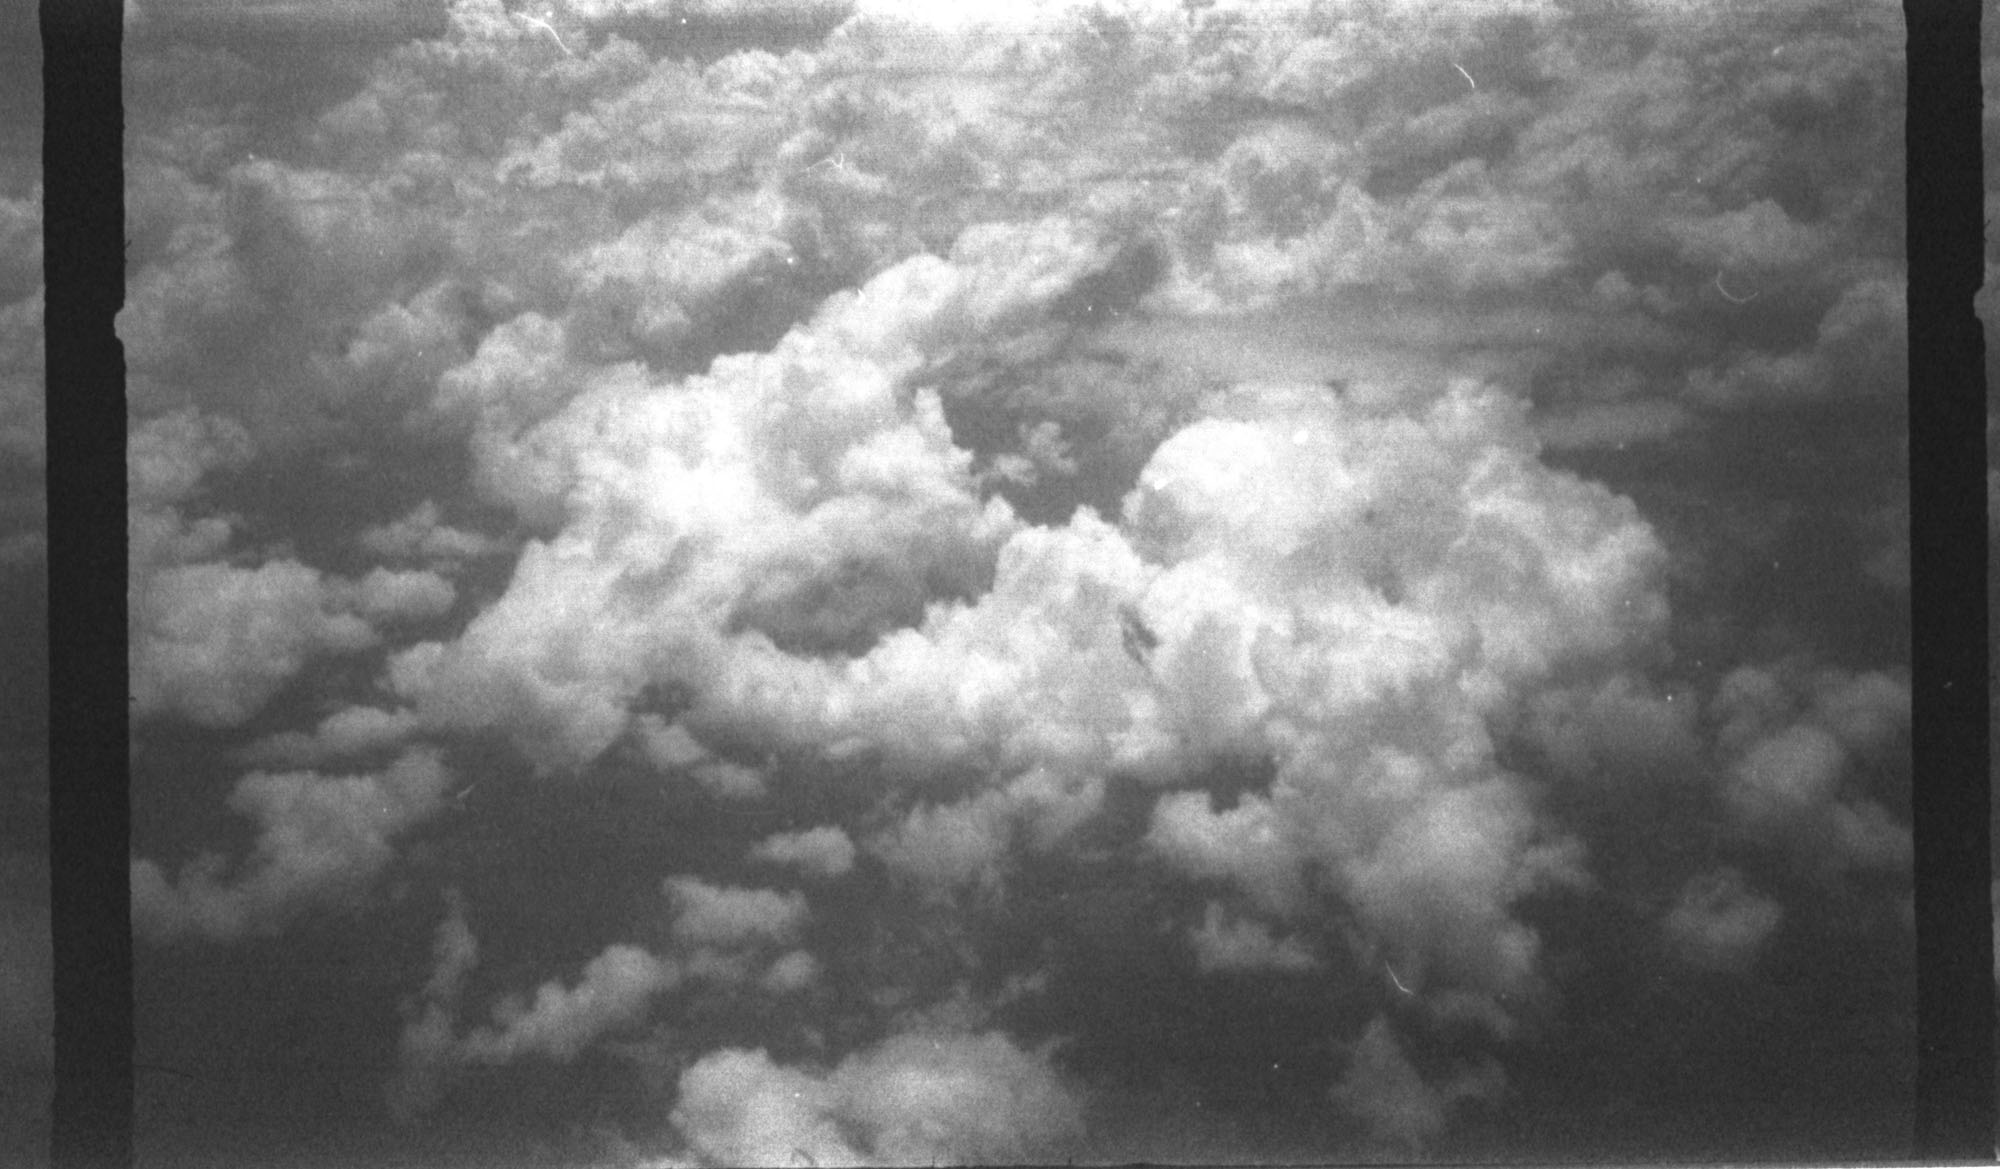 Clouds captured in black and white